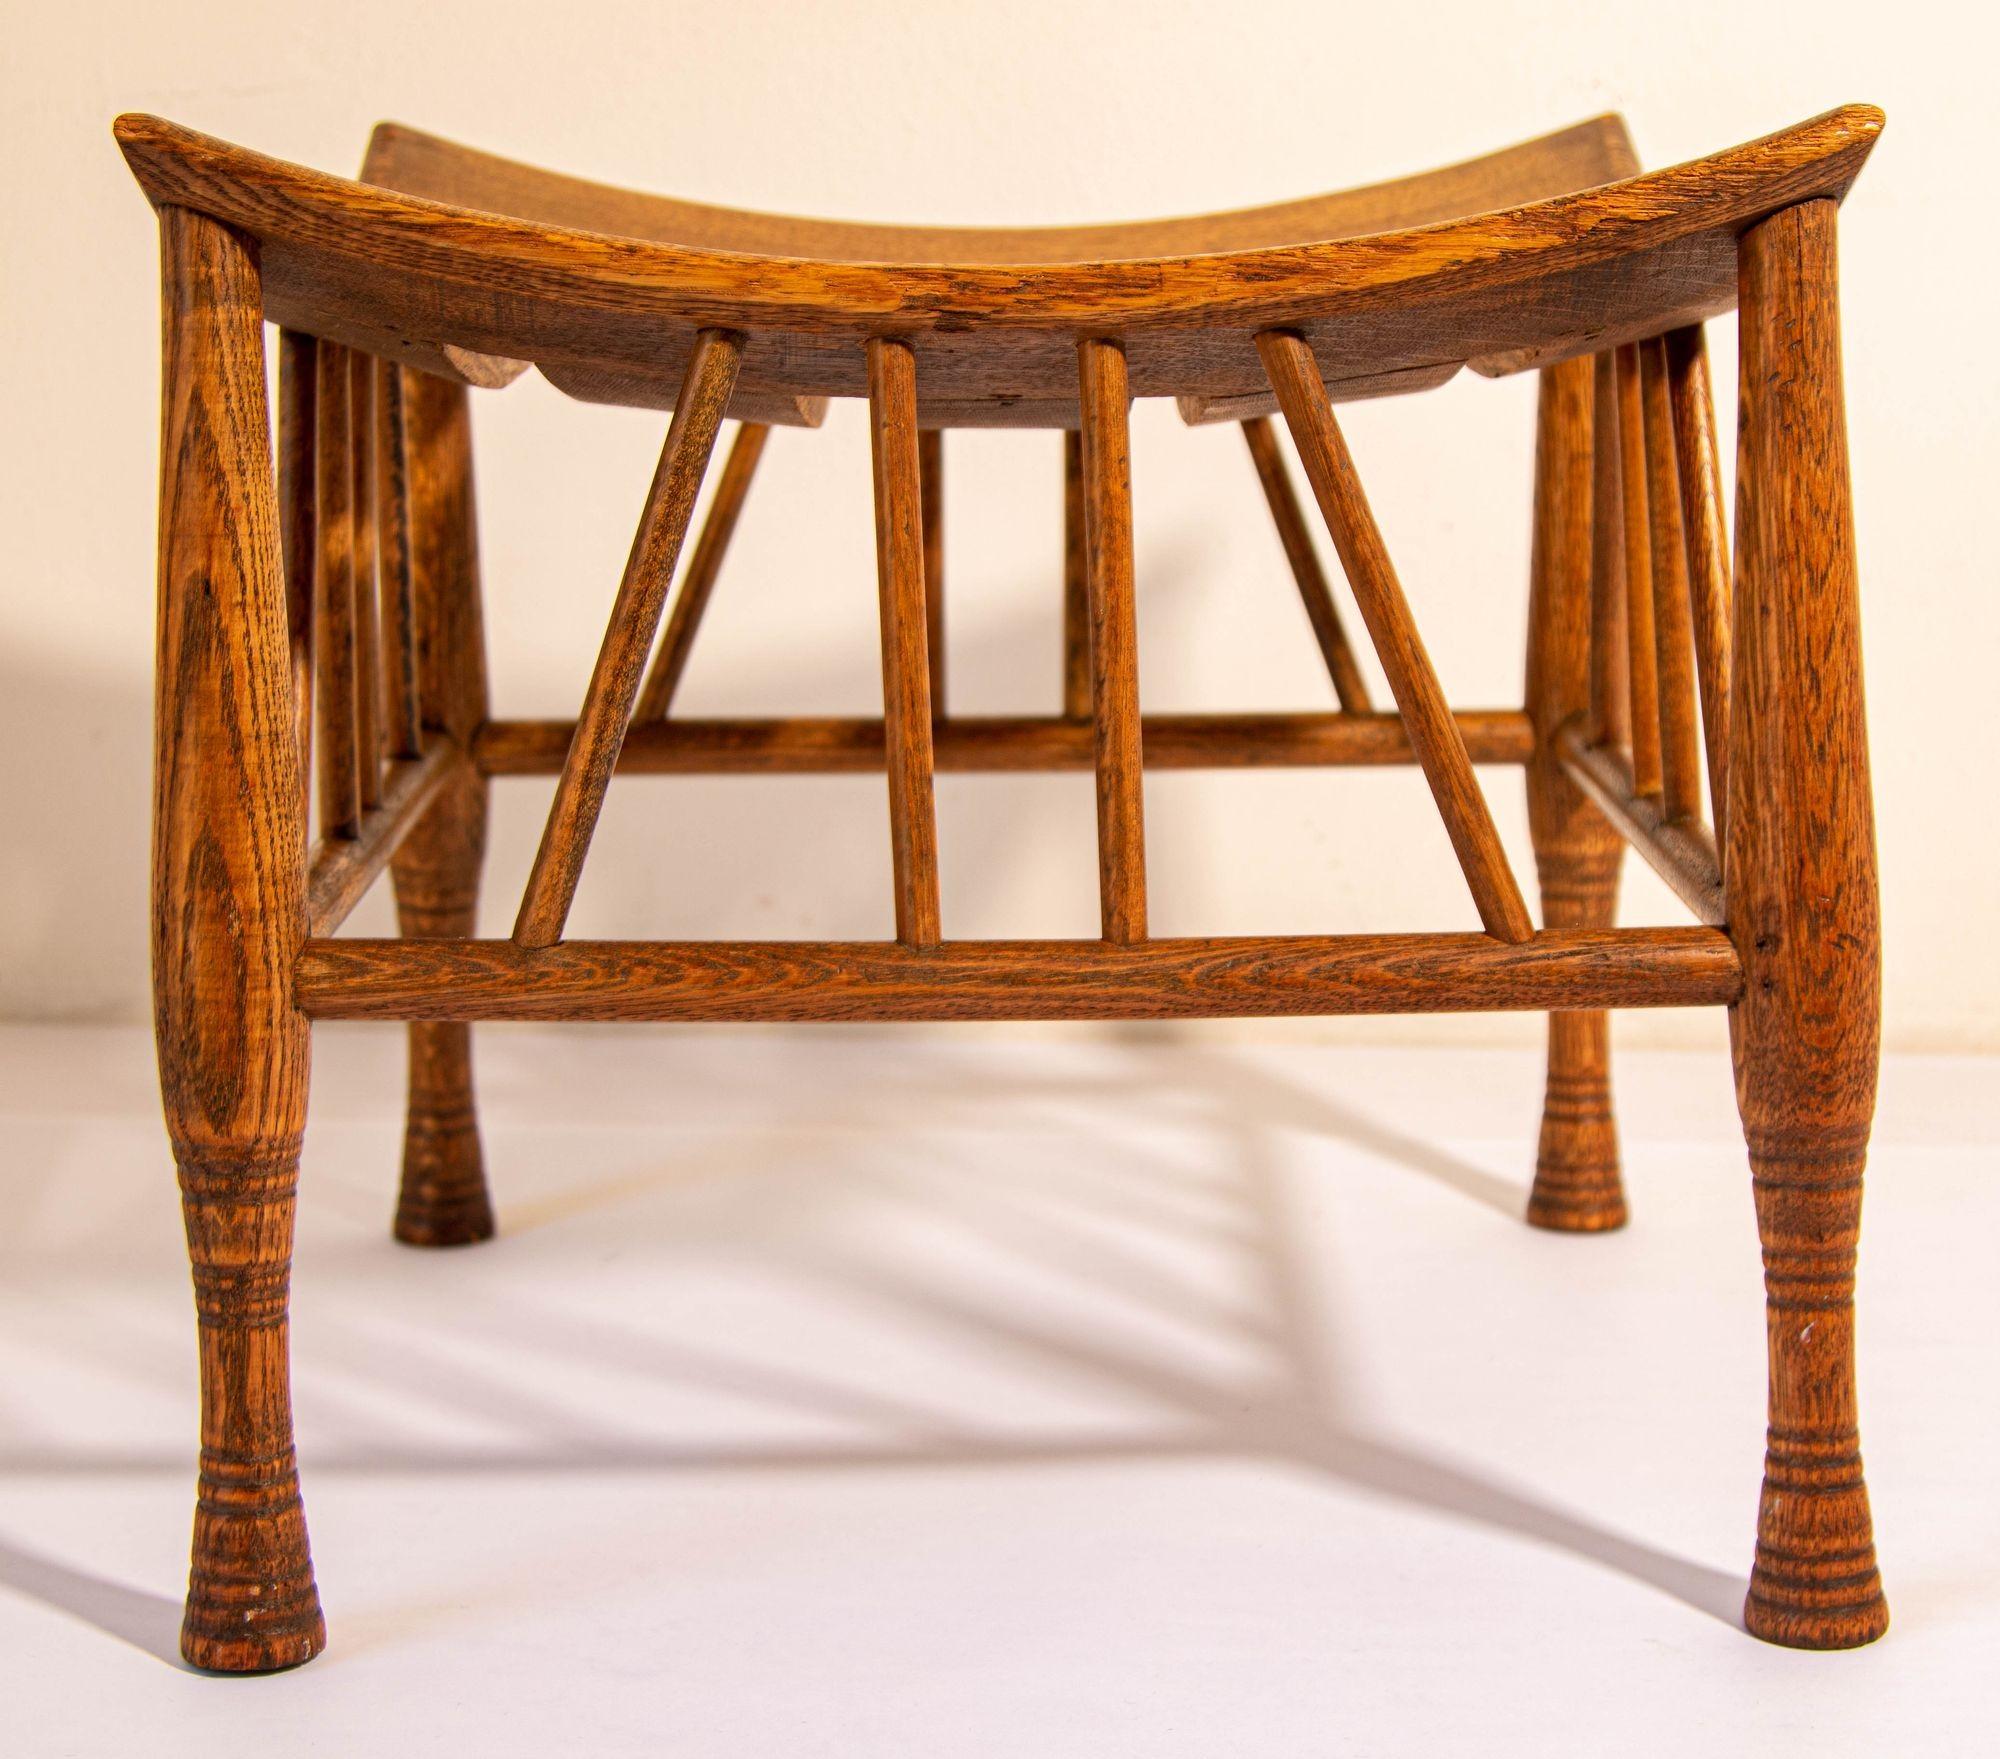 Hand-Crafted Egyptian Revival Thebes Stool, Liberty & Co Attributed Circa 1920s For Sale